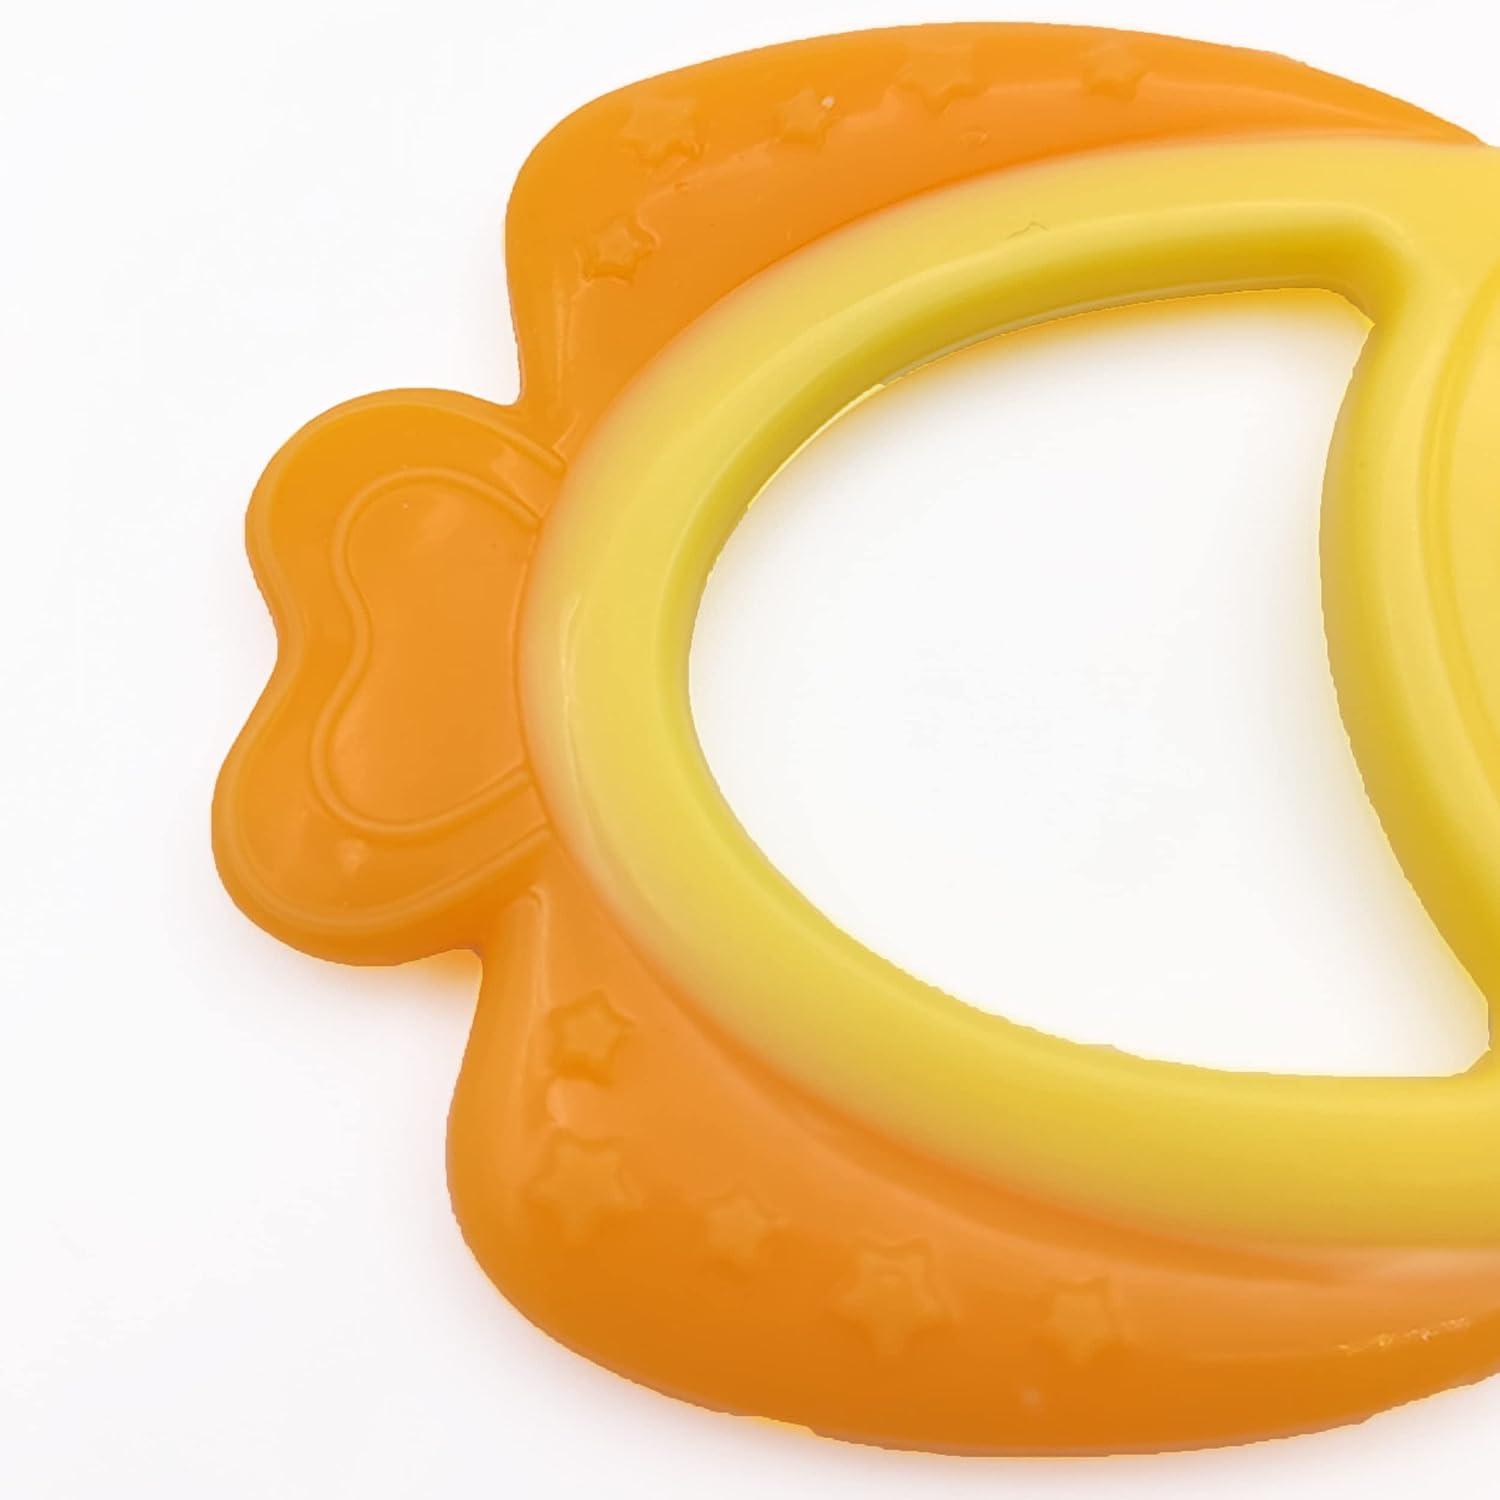 Fish Baby Teething Toys Teether Ring Food Grade Silicone Soft-Textured  Infant Toddler Toys for Teething Relief & Brain Development for Babies 0-6  Months 6-12 Months Baby Registry Newborn Essentials Golden Fish